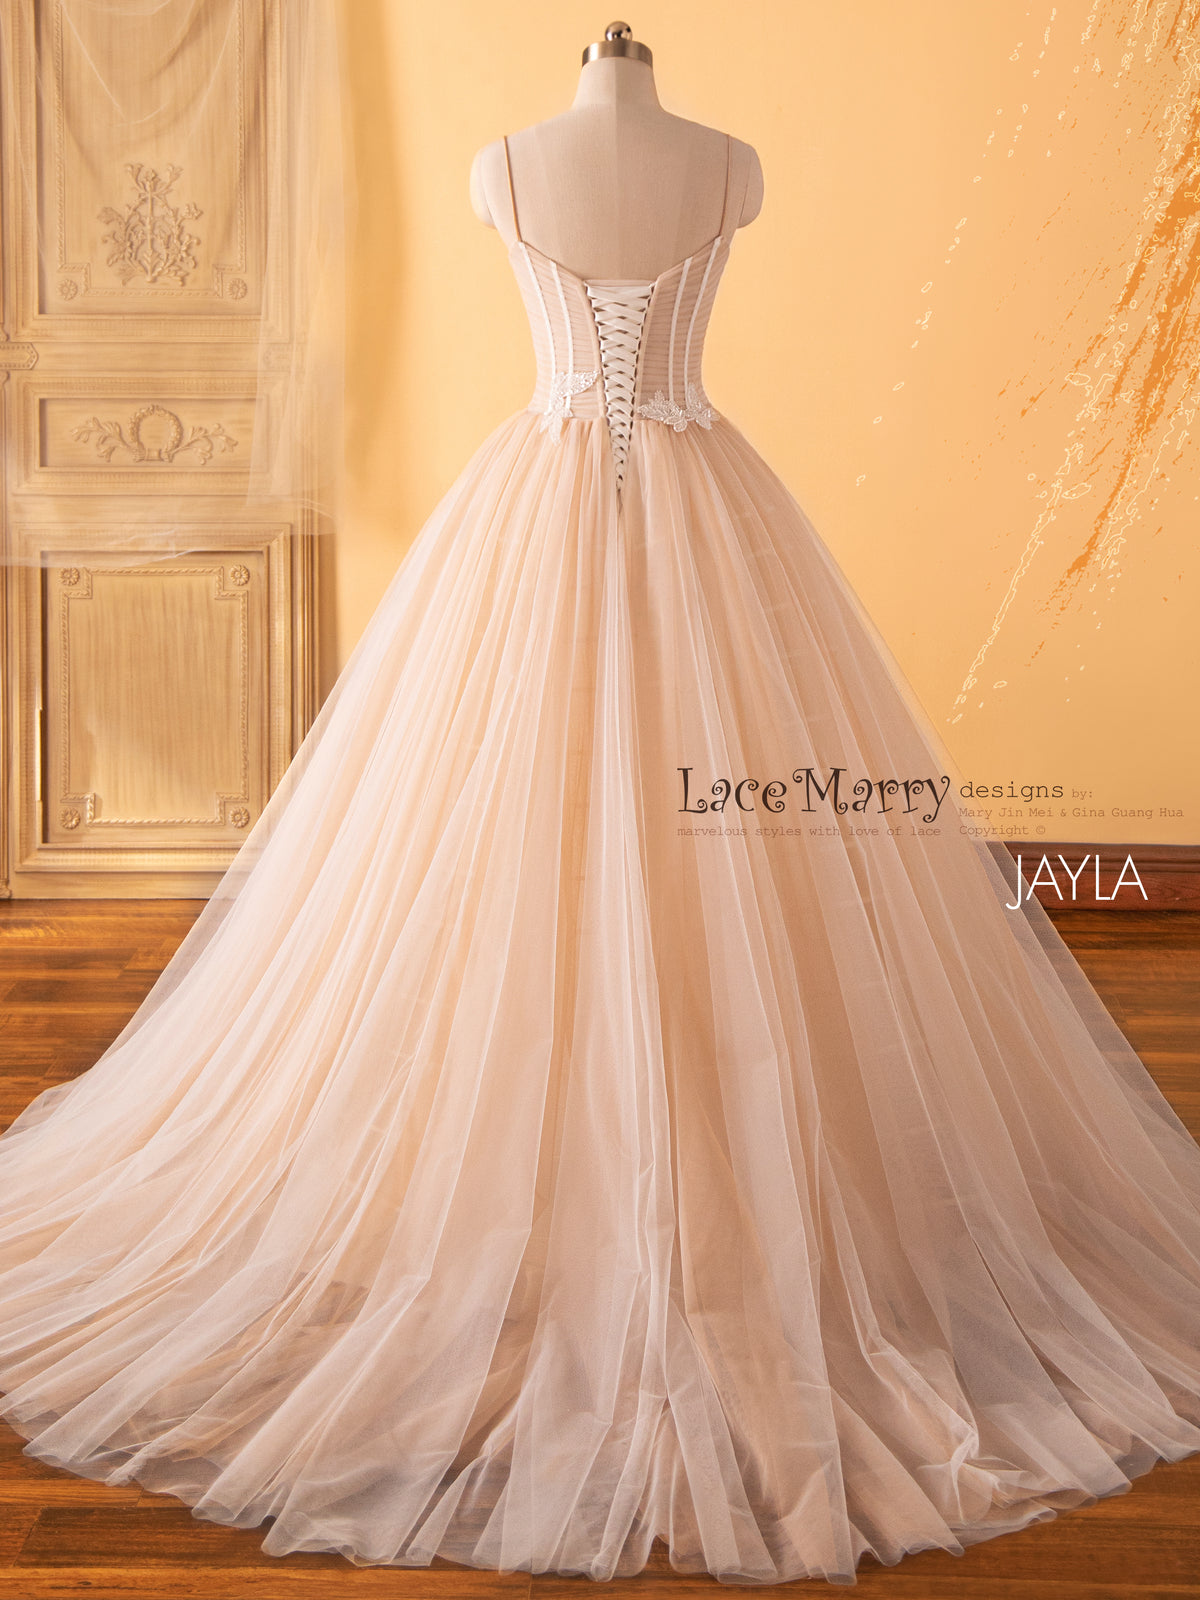 JAYLA / Colored Wedding Dress with A Line Skirt and Spaghetti Straps